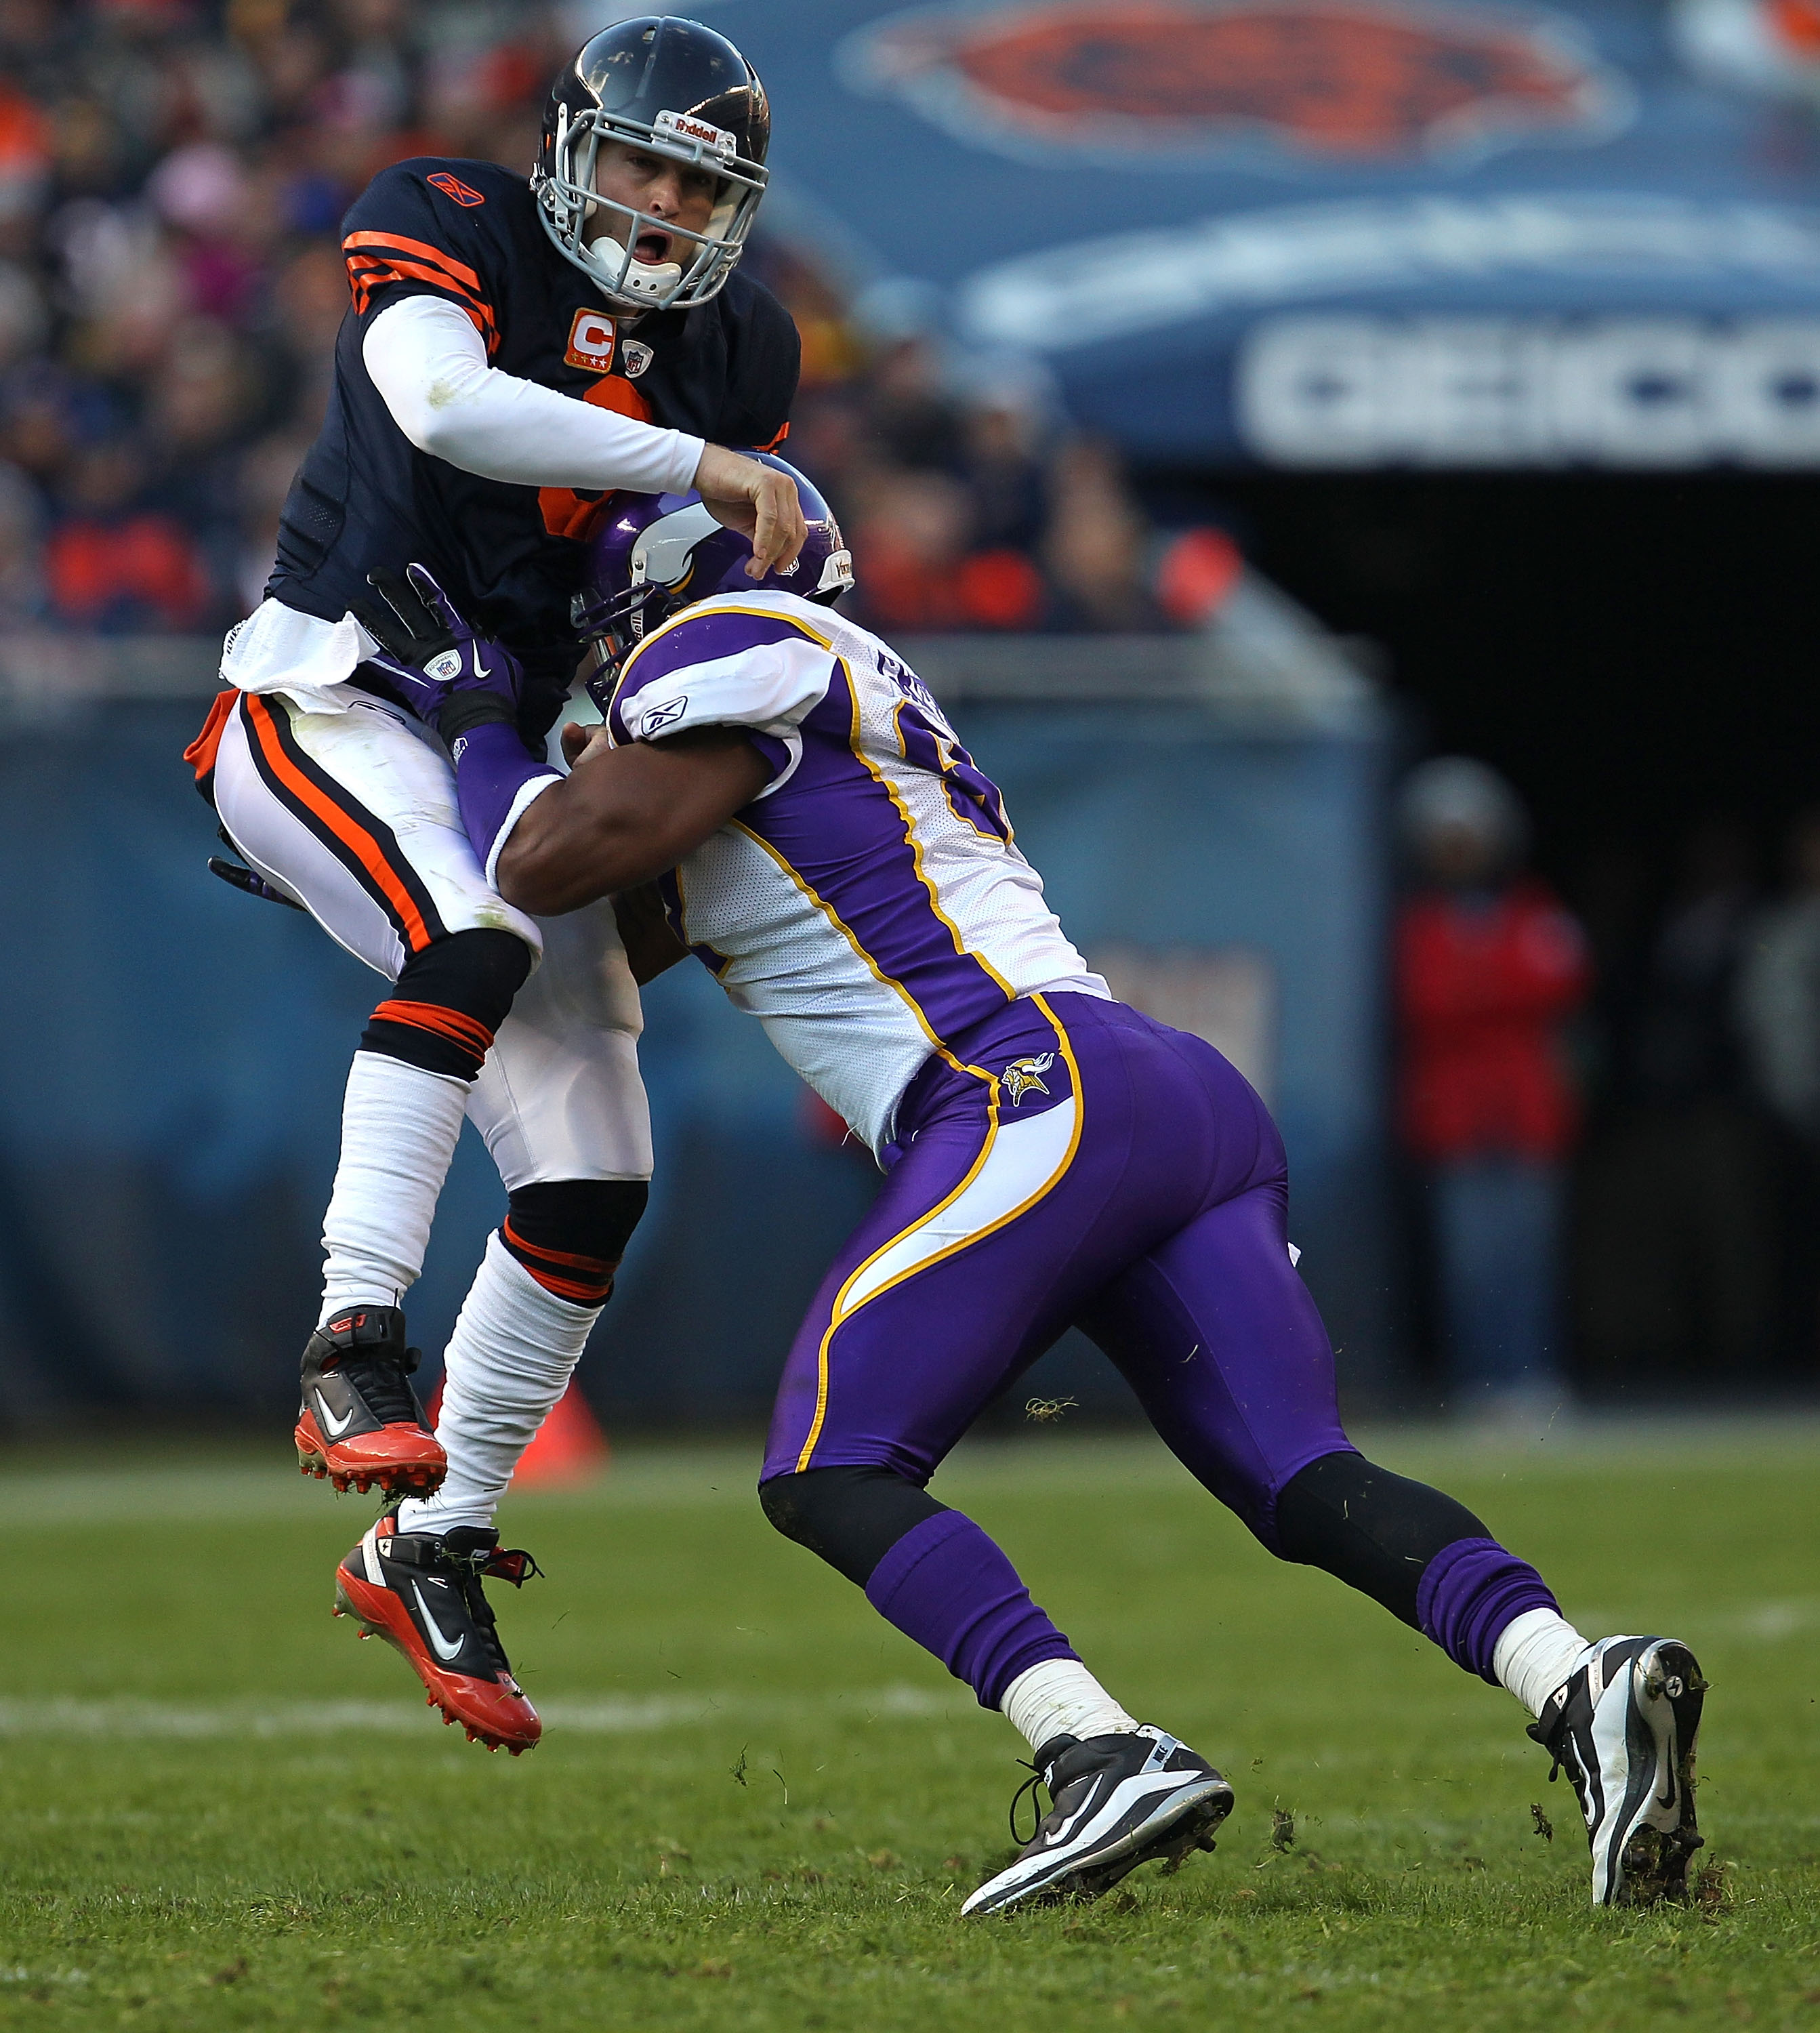 CHICAGO - NOVEMBER 14: Jay Cutler #6 of the Chicago Bears is hit after throwing a pass by Everson Griffen #97 of the Minnesota Vikings at Soldier Field on November 14, 2010 in Chicago, Illinois. The Bears defeated the Vikings 27-13. (Photo by Jonathan Dan